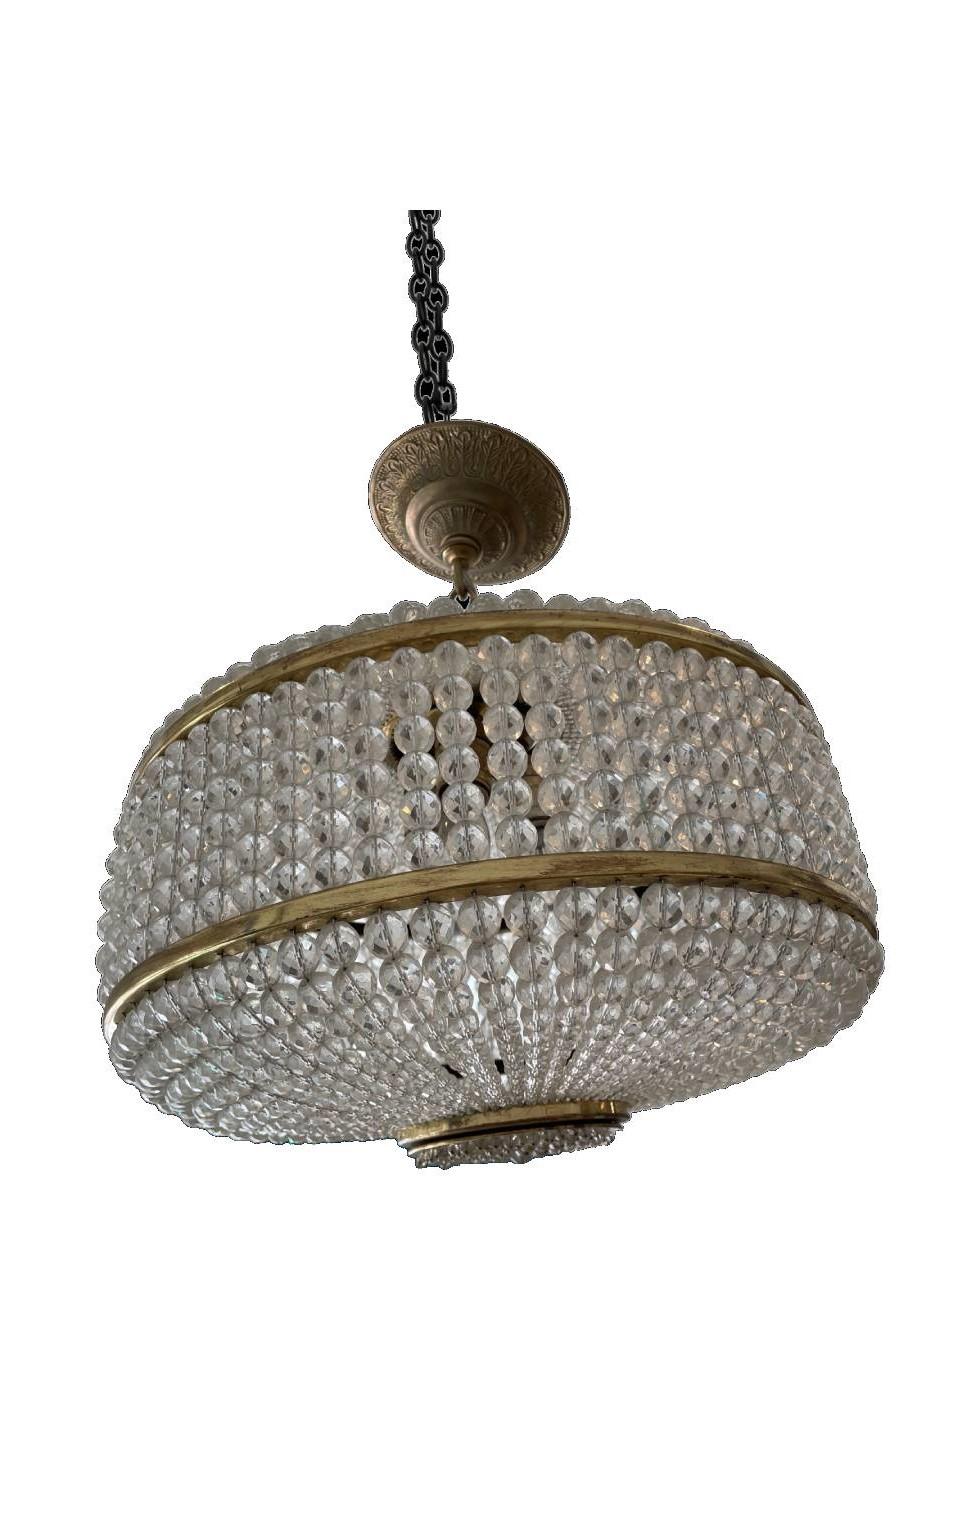 Hollywood Regency Brass and Crystal Drum Pendant Light Fixture For Sale